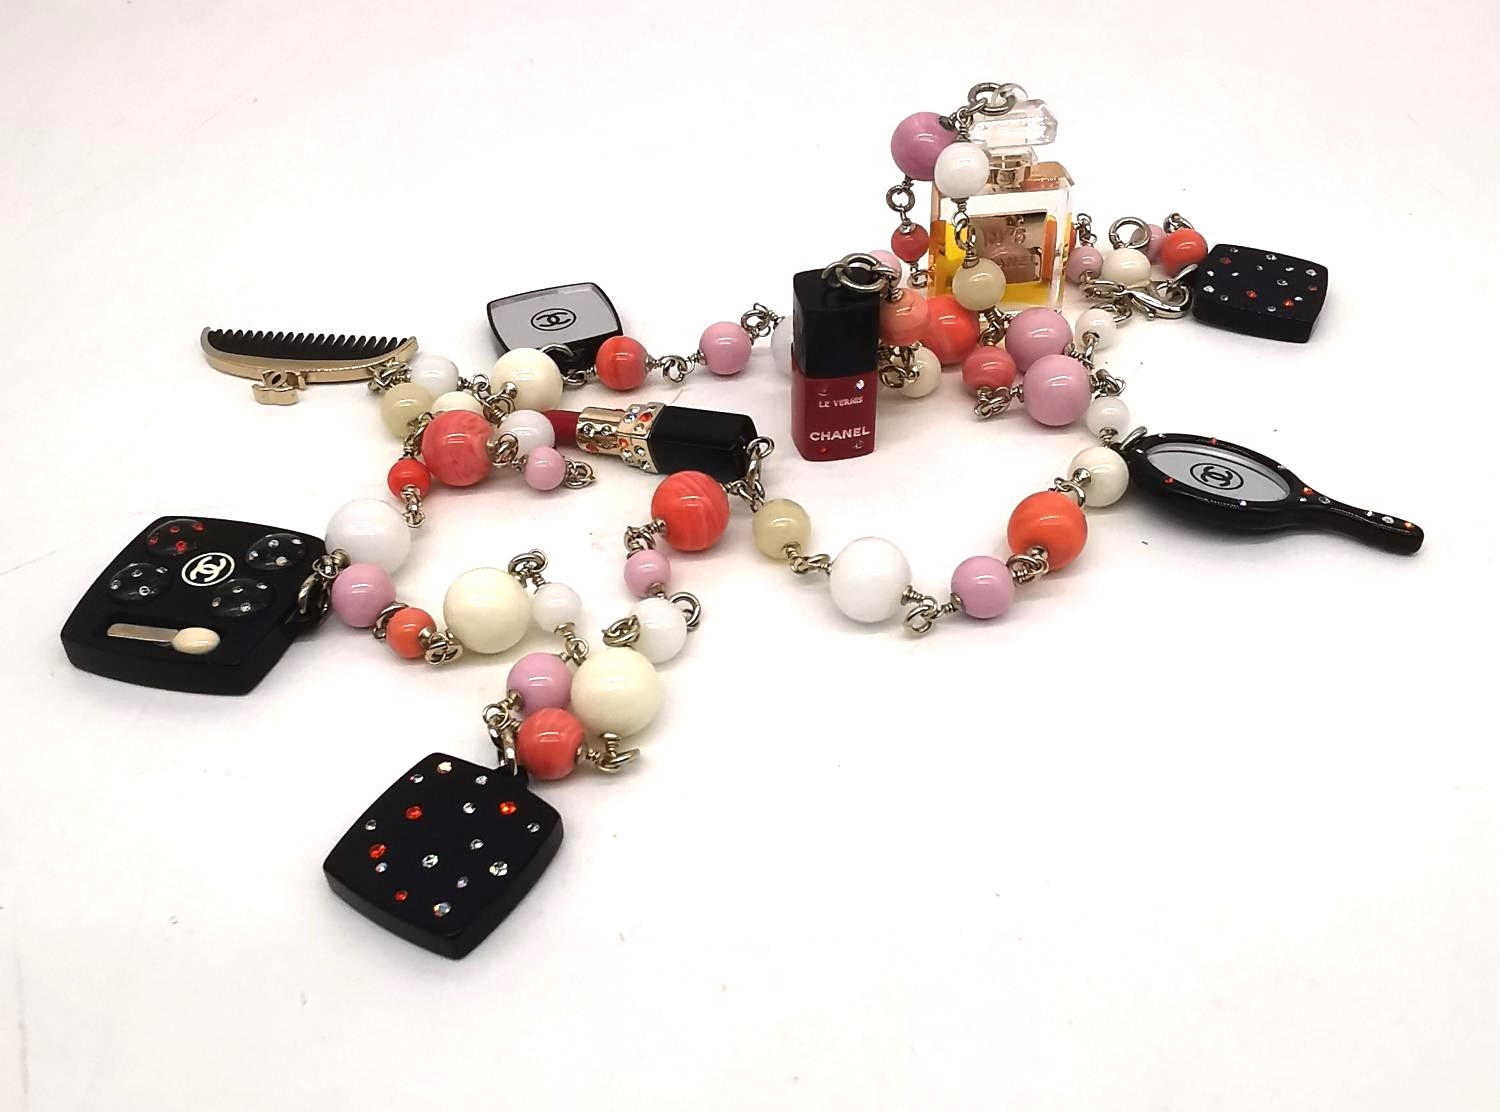 A boxed 2004 Chanel Cosmetics Sautoir necklace. Vintage Perfume and Cosmetics Charms long necklace - Image 4 of 5